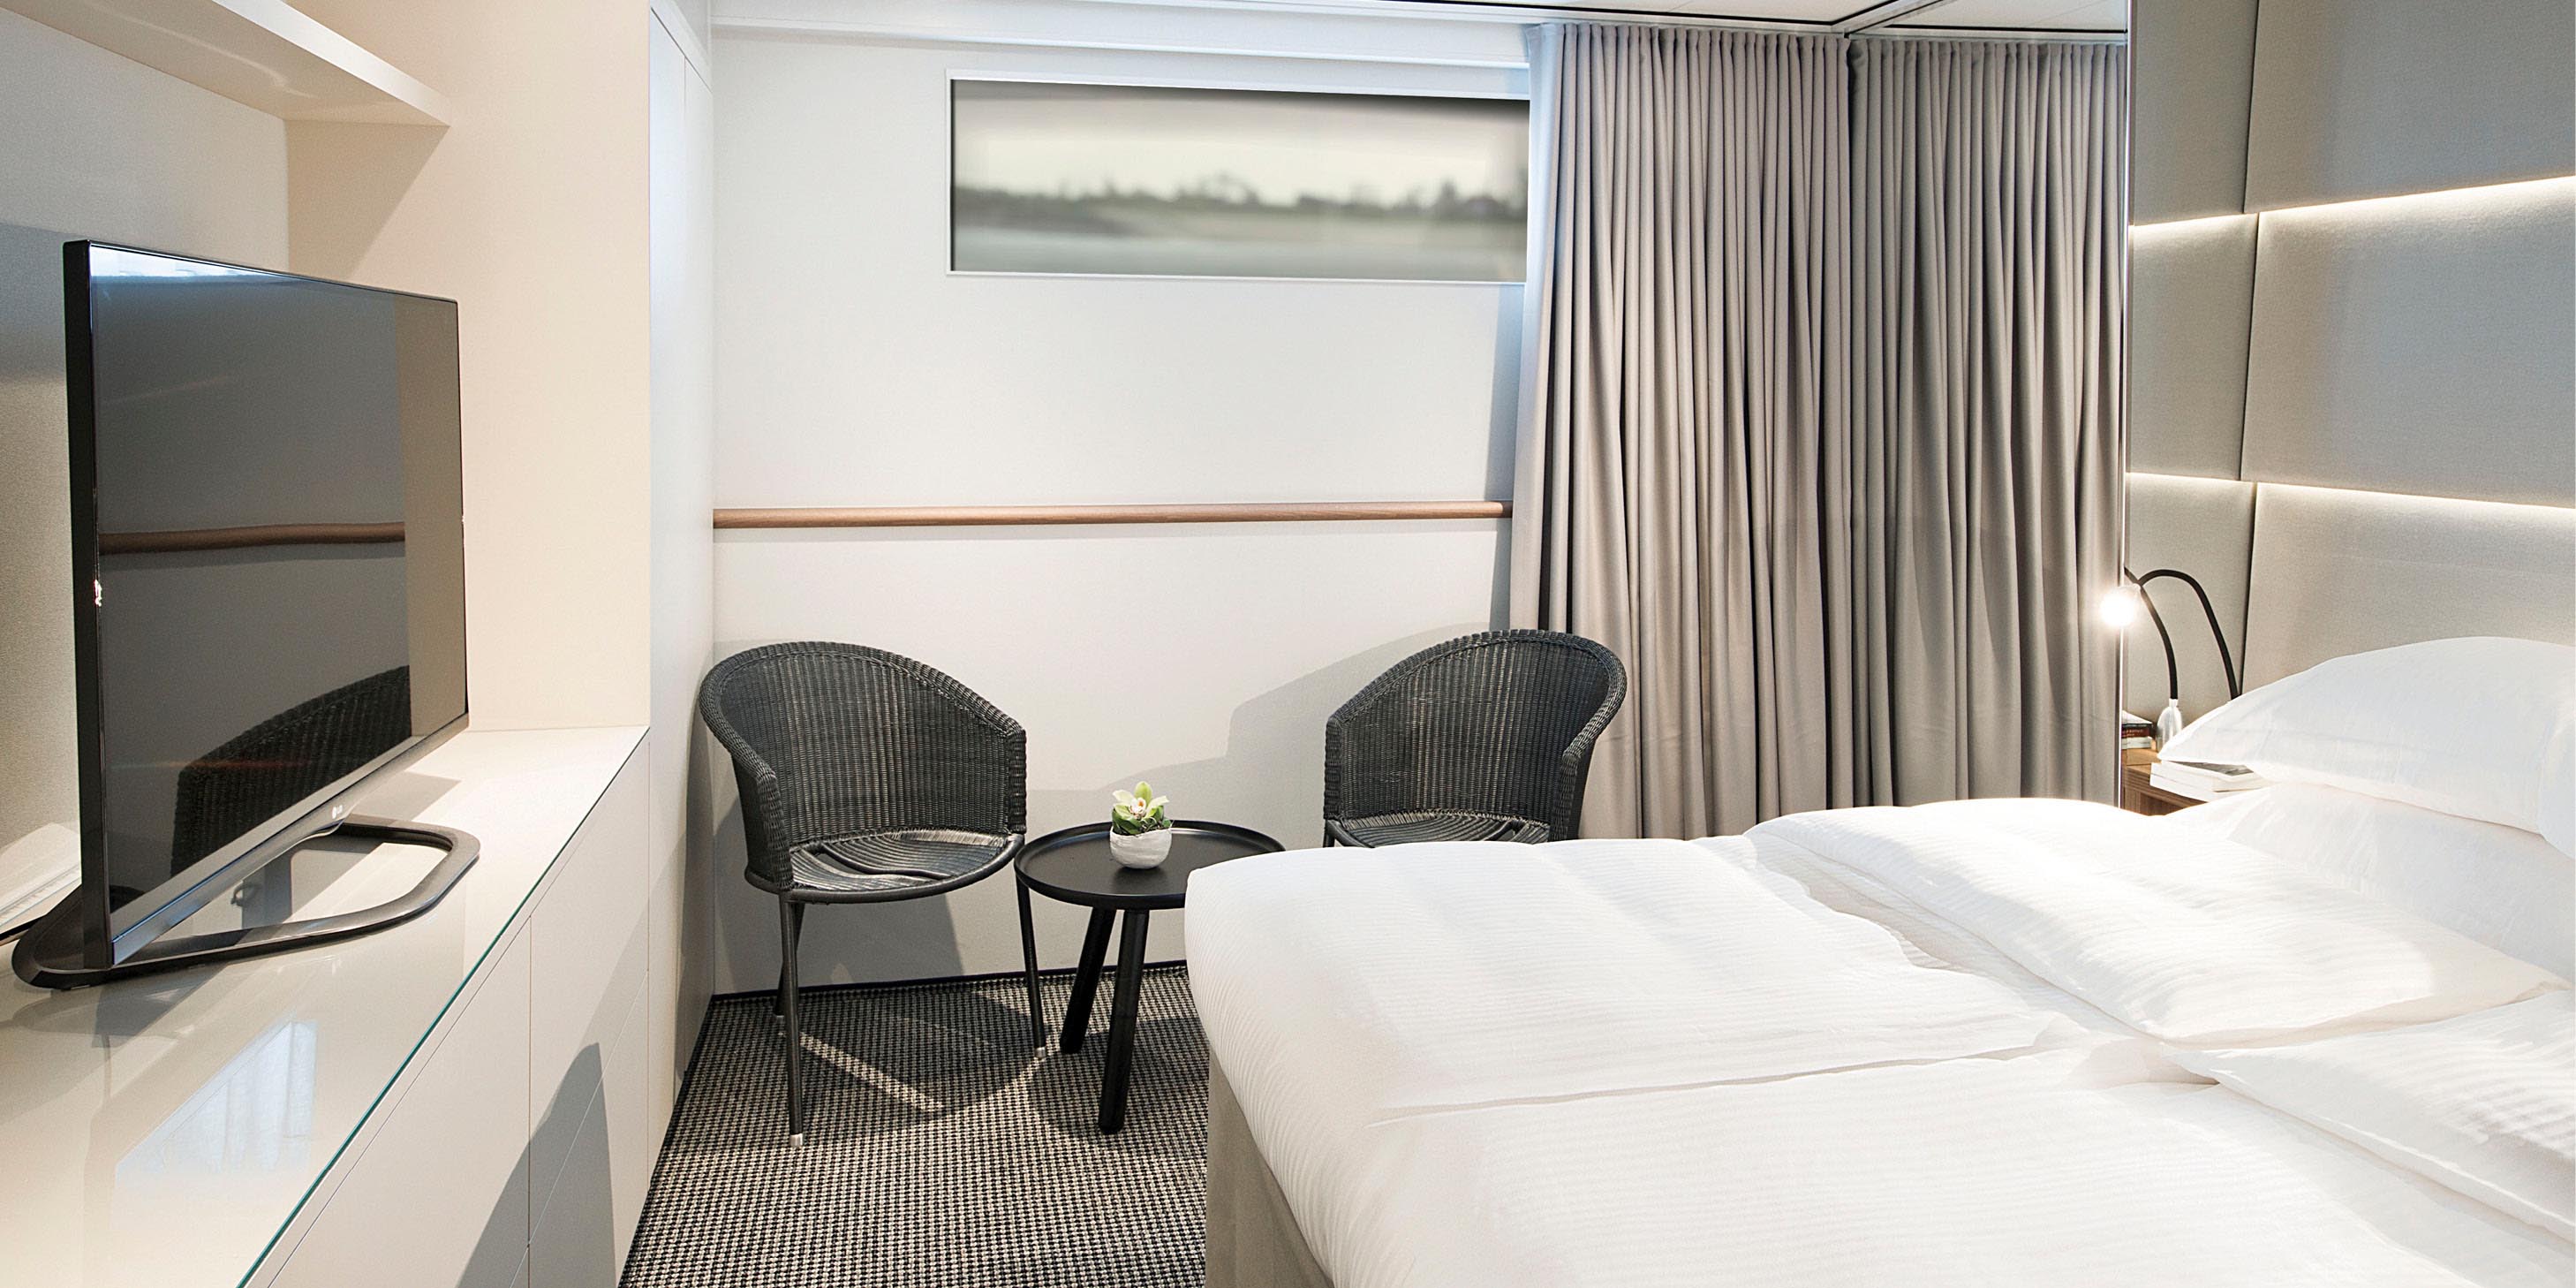 Emerald Stateroom accommodation complete with large bed, seating, flat-screen TV, and portside window views